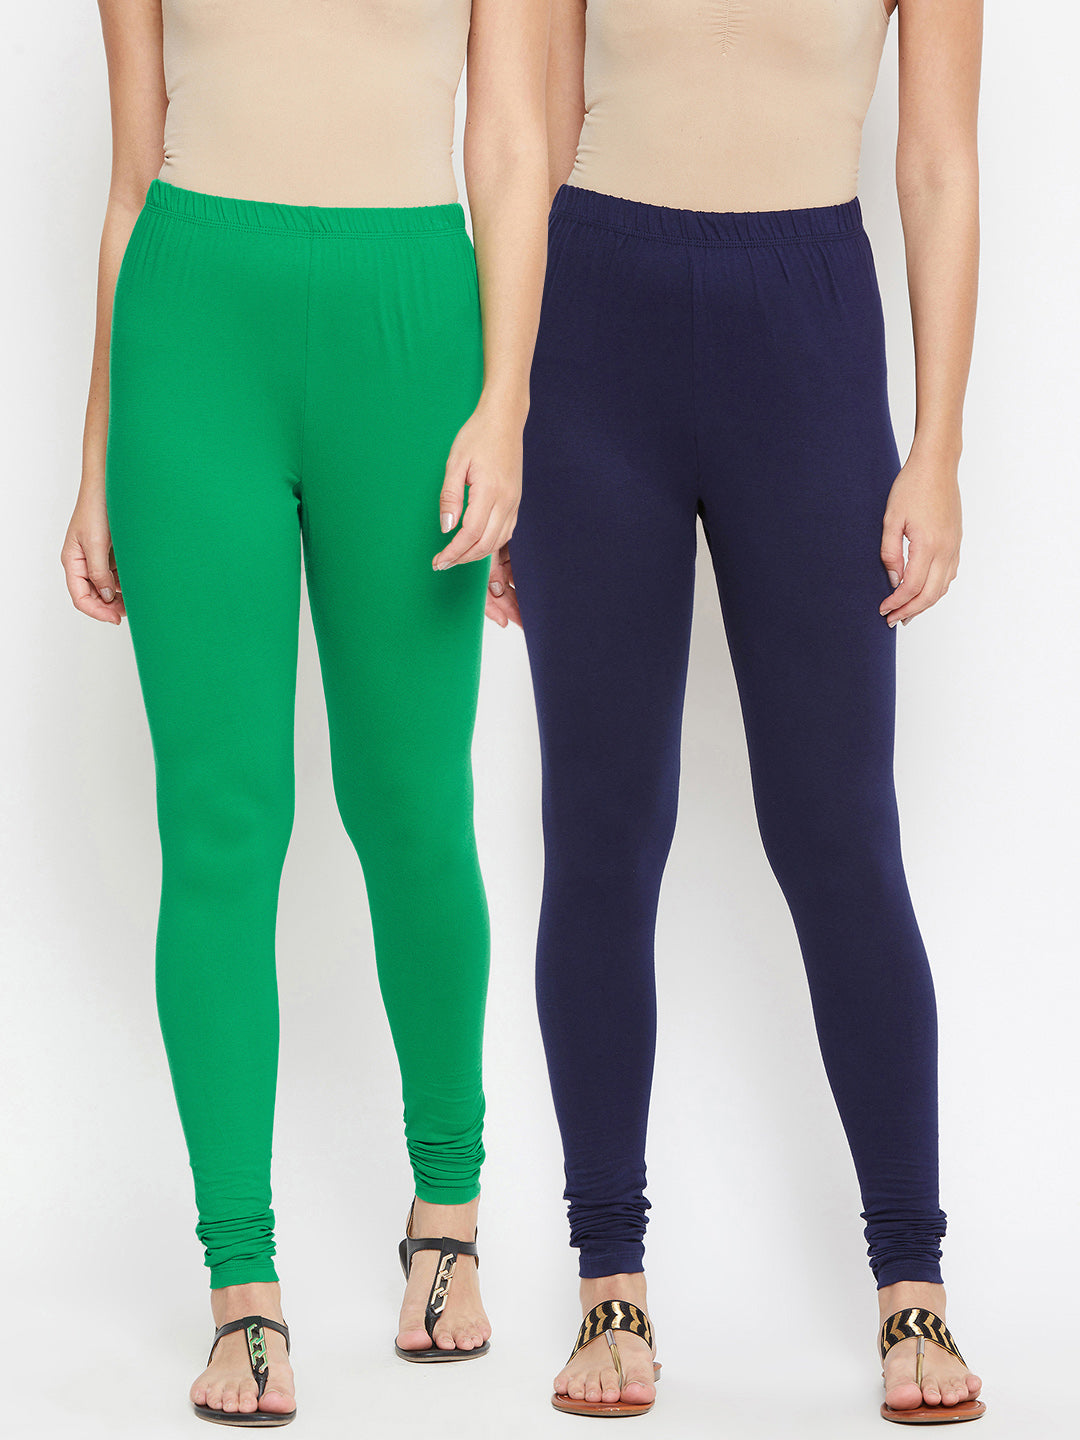 Combo of Solid Color Lycra Leggings in Blue and Green : BNJ766